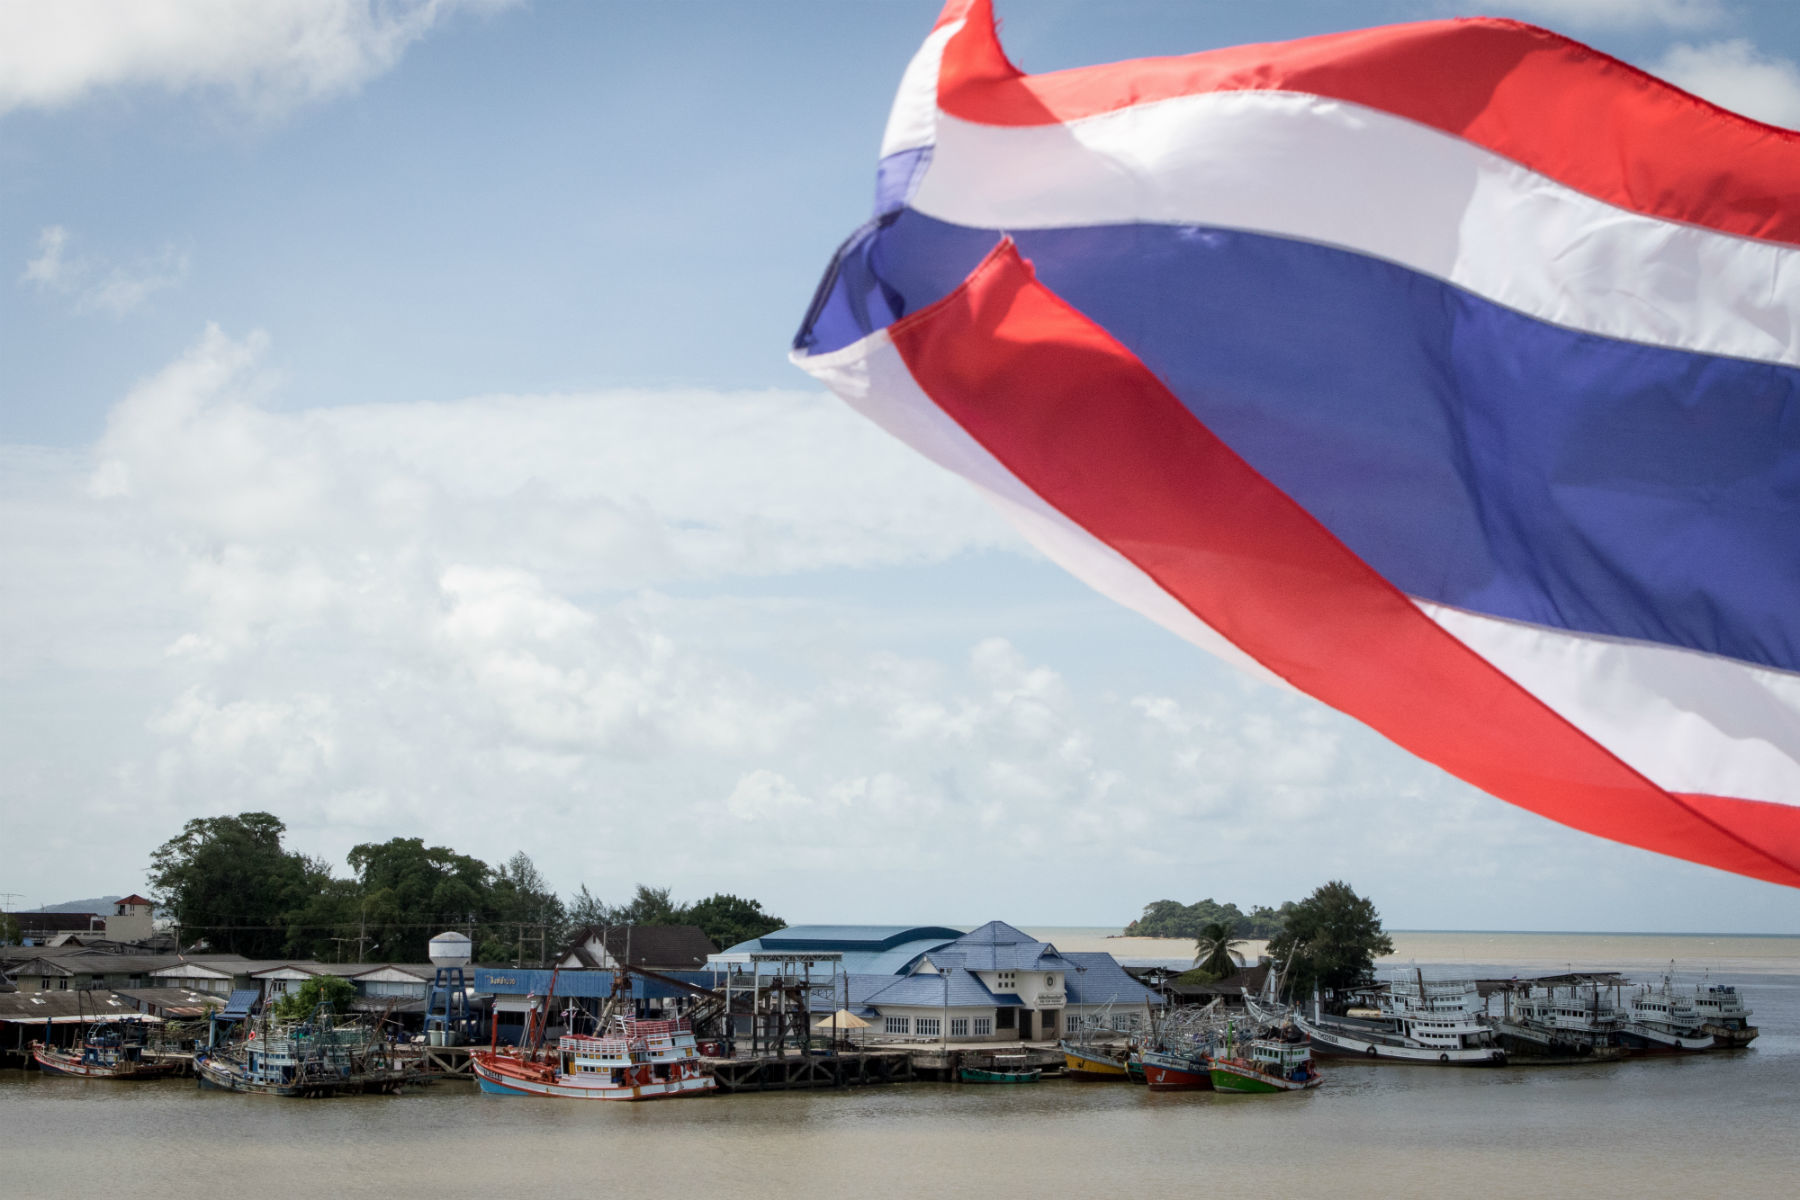 Thailand shows commitment to ending overfishing and human rights abuses